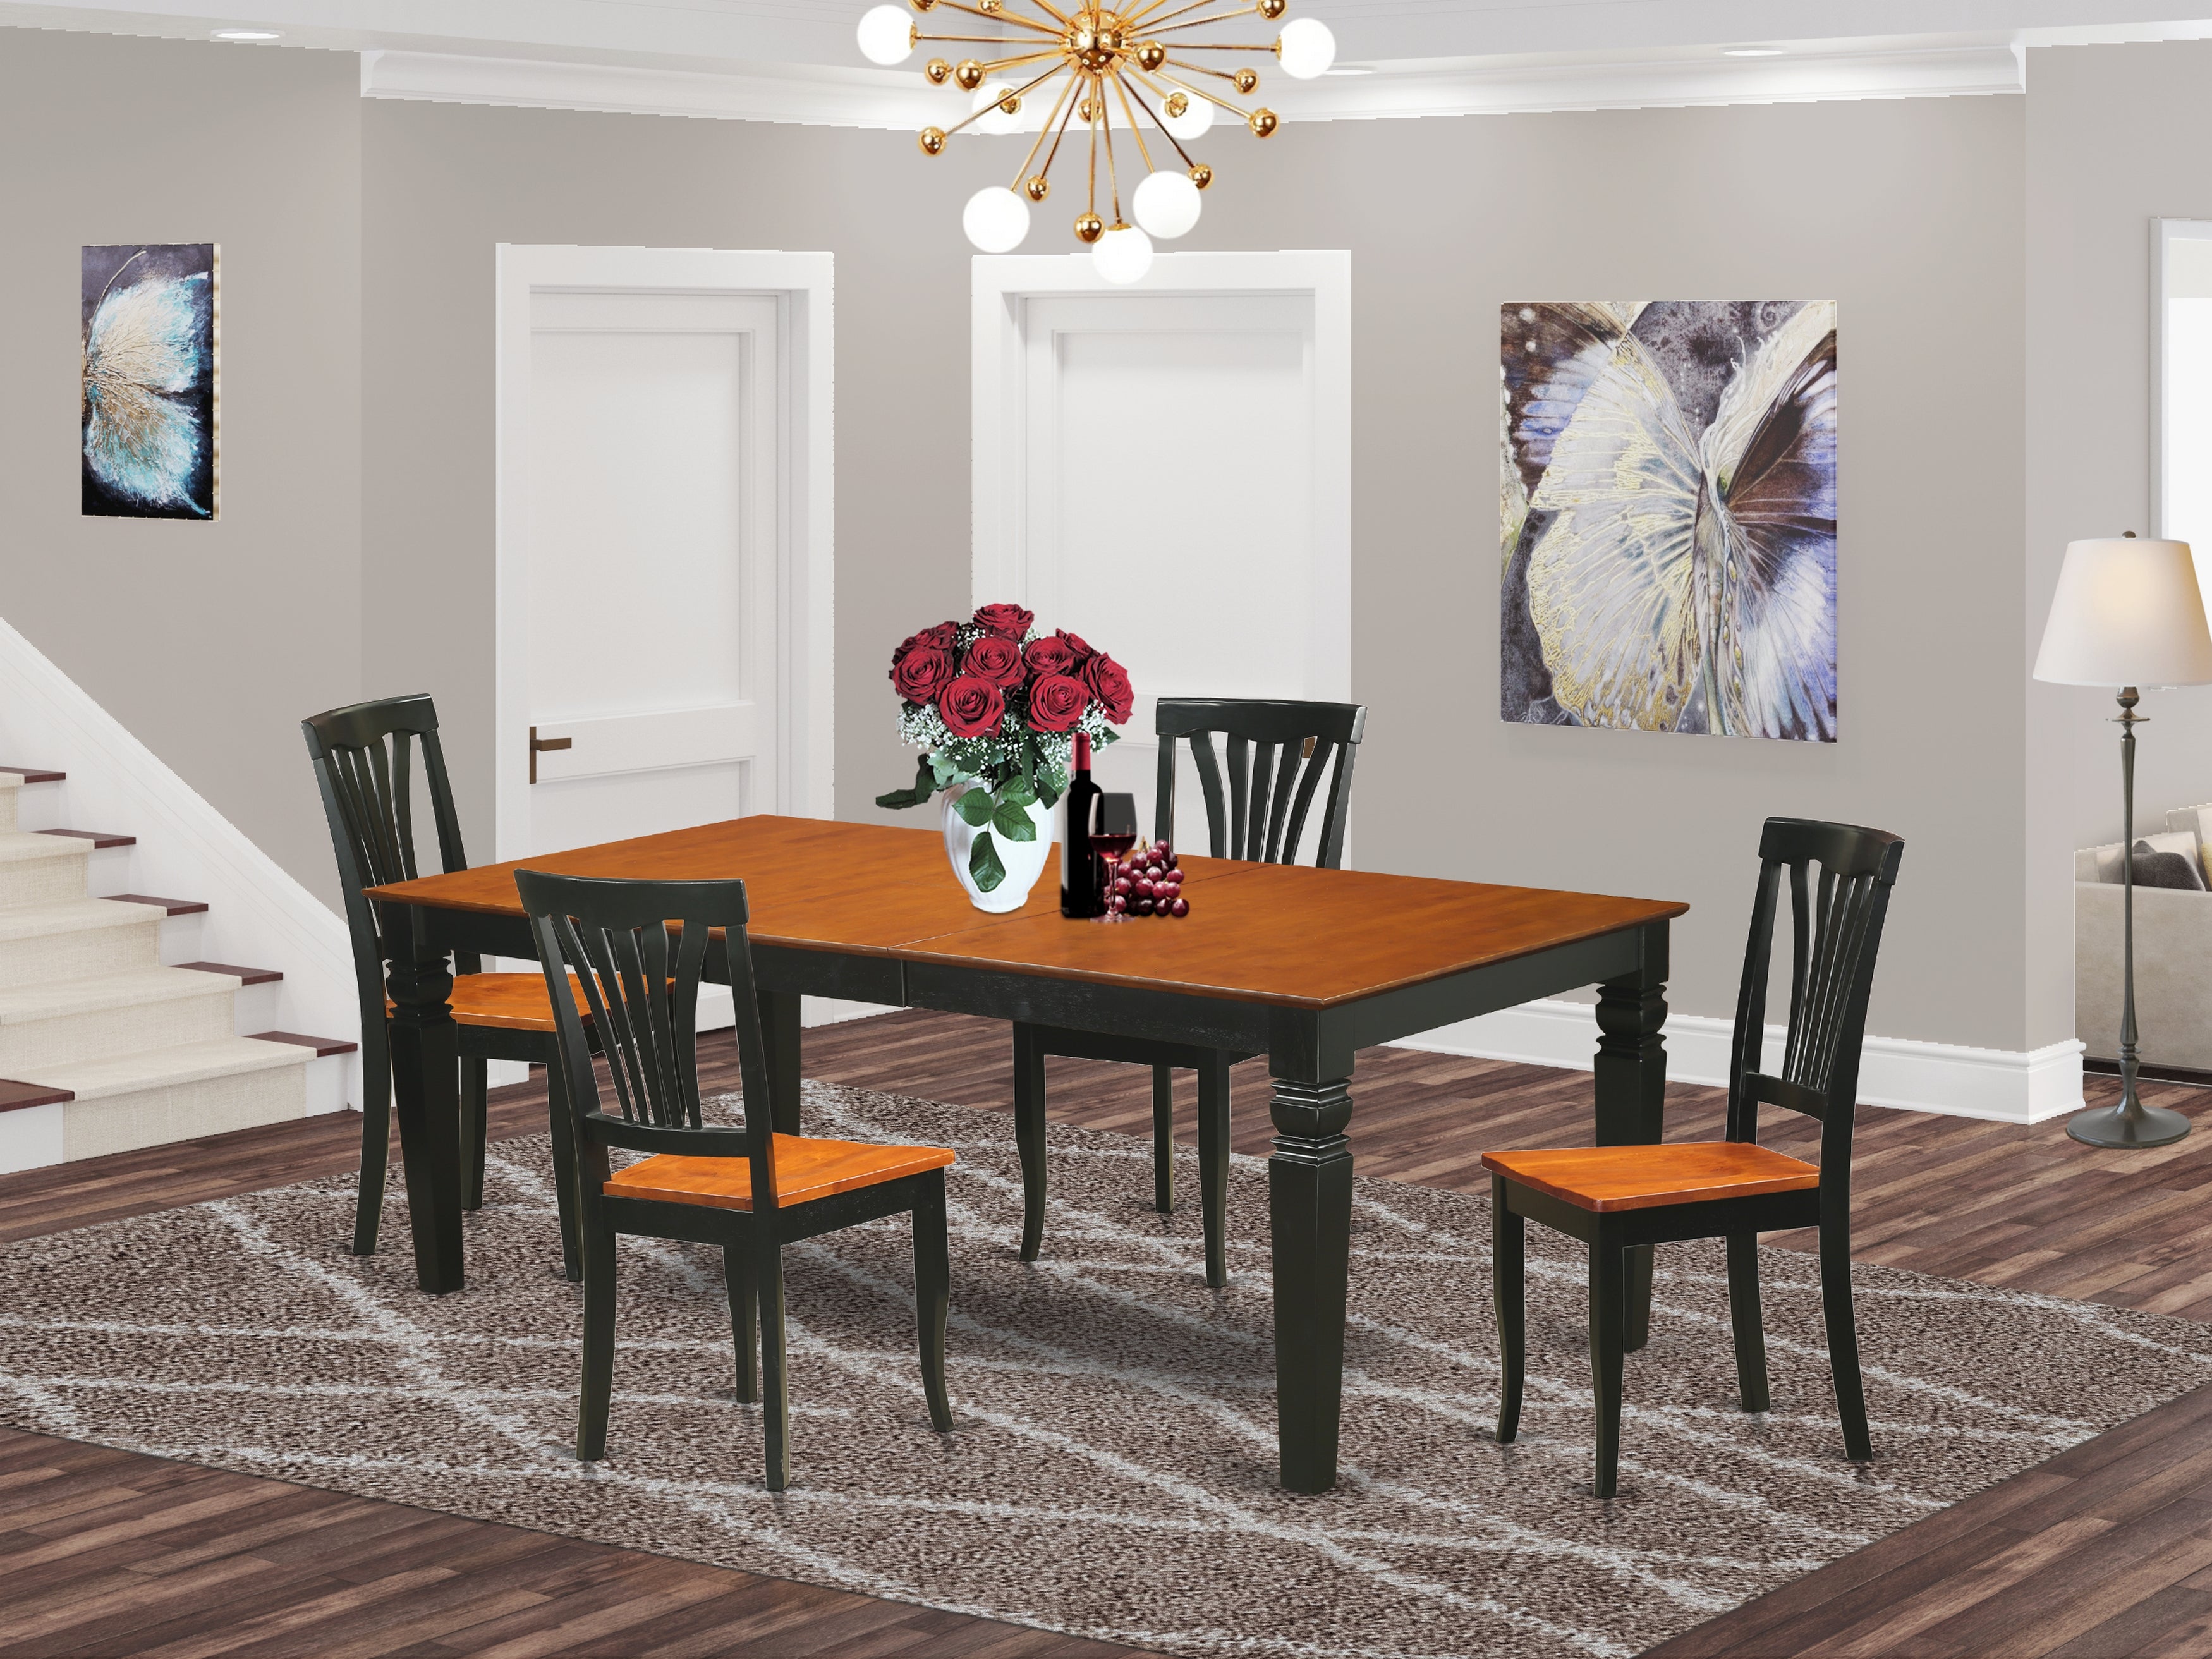 LGAV5-BCH-W 5 Pc Table and chair set with a Table and 4 Dining Chairs in Black and Cherry